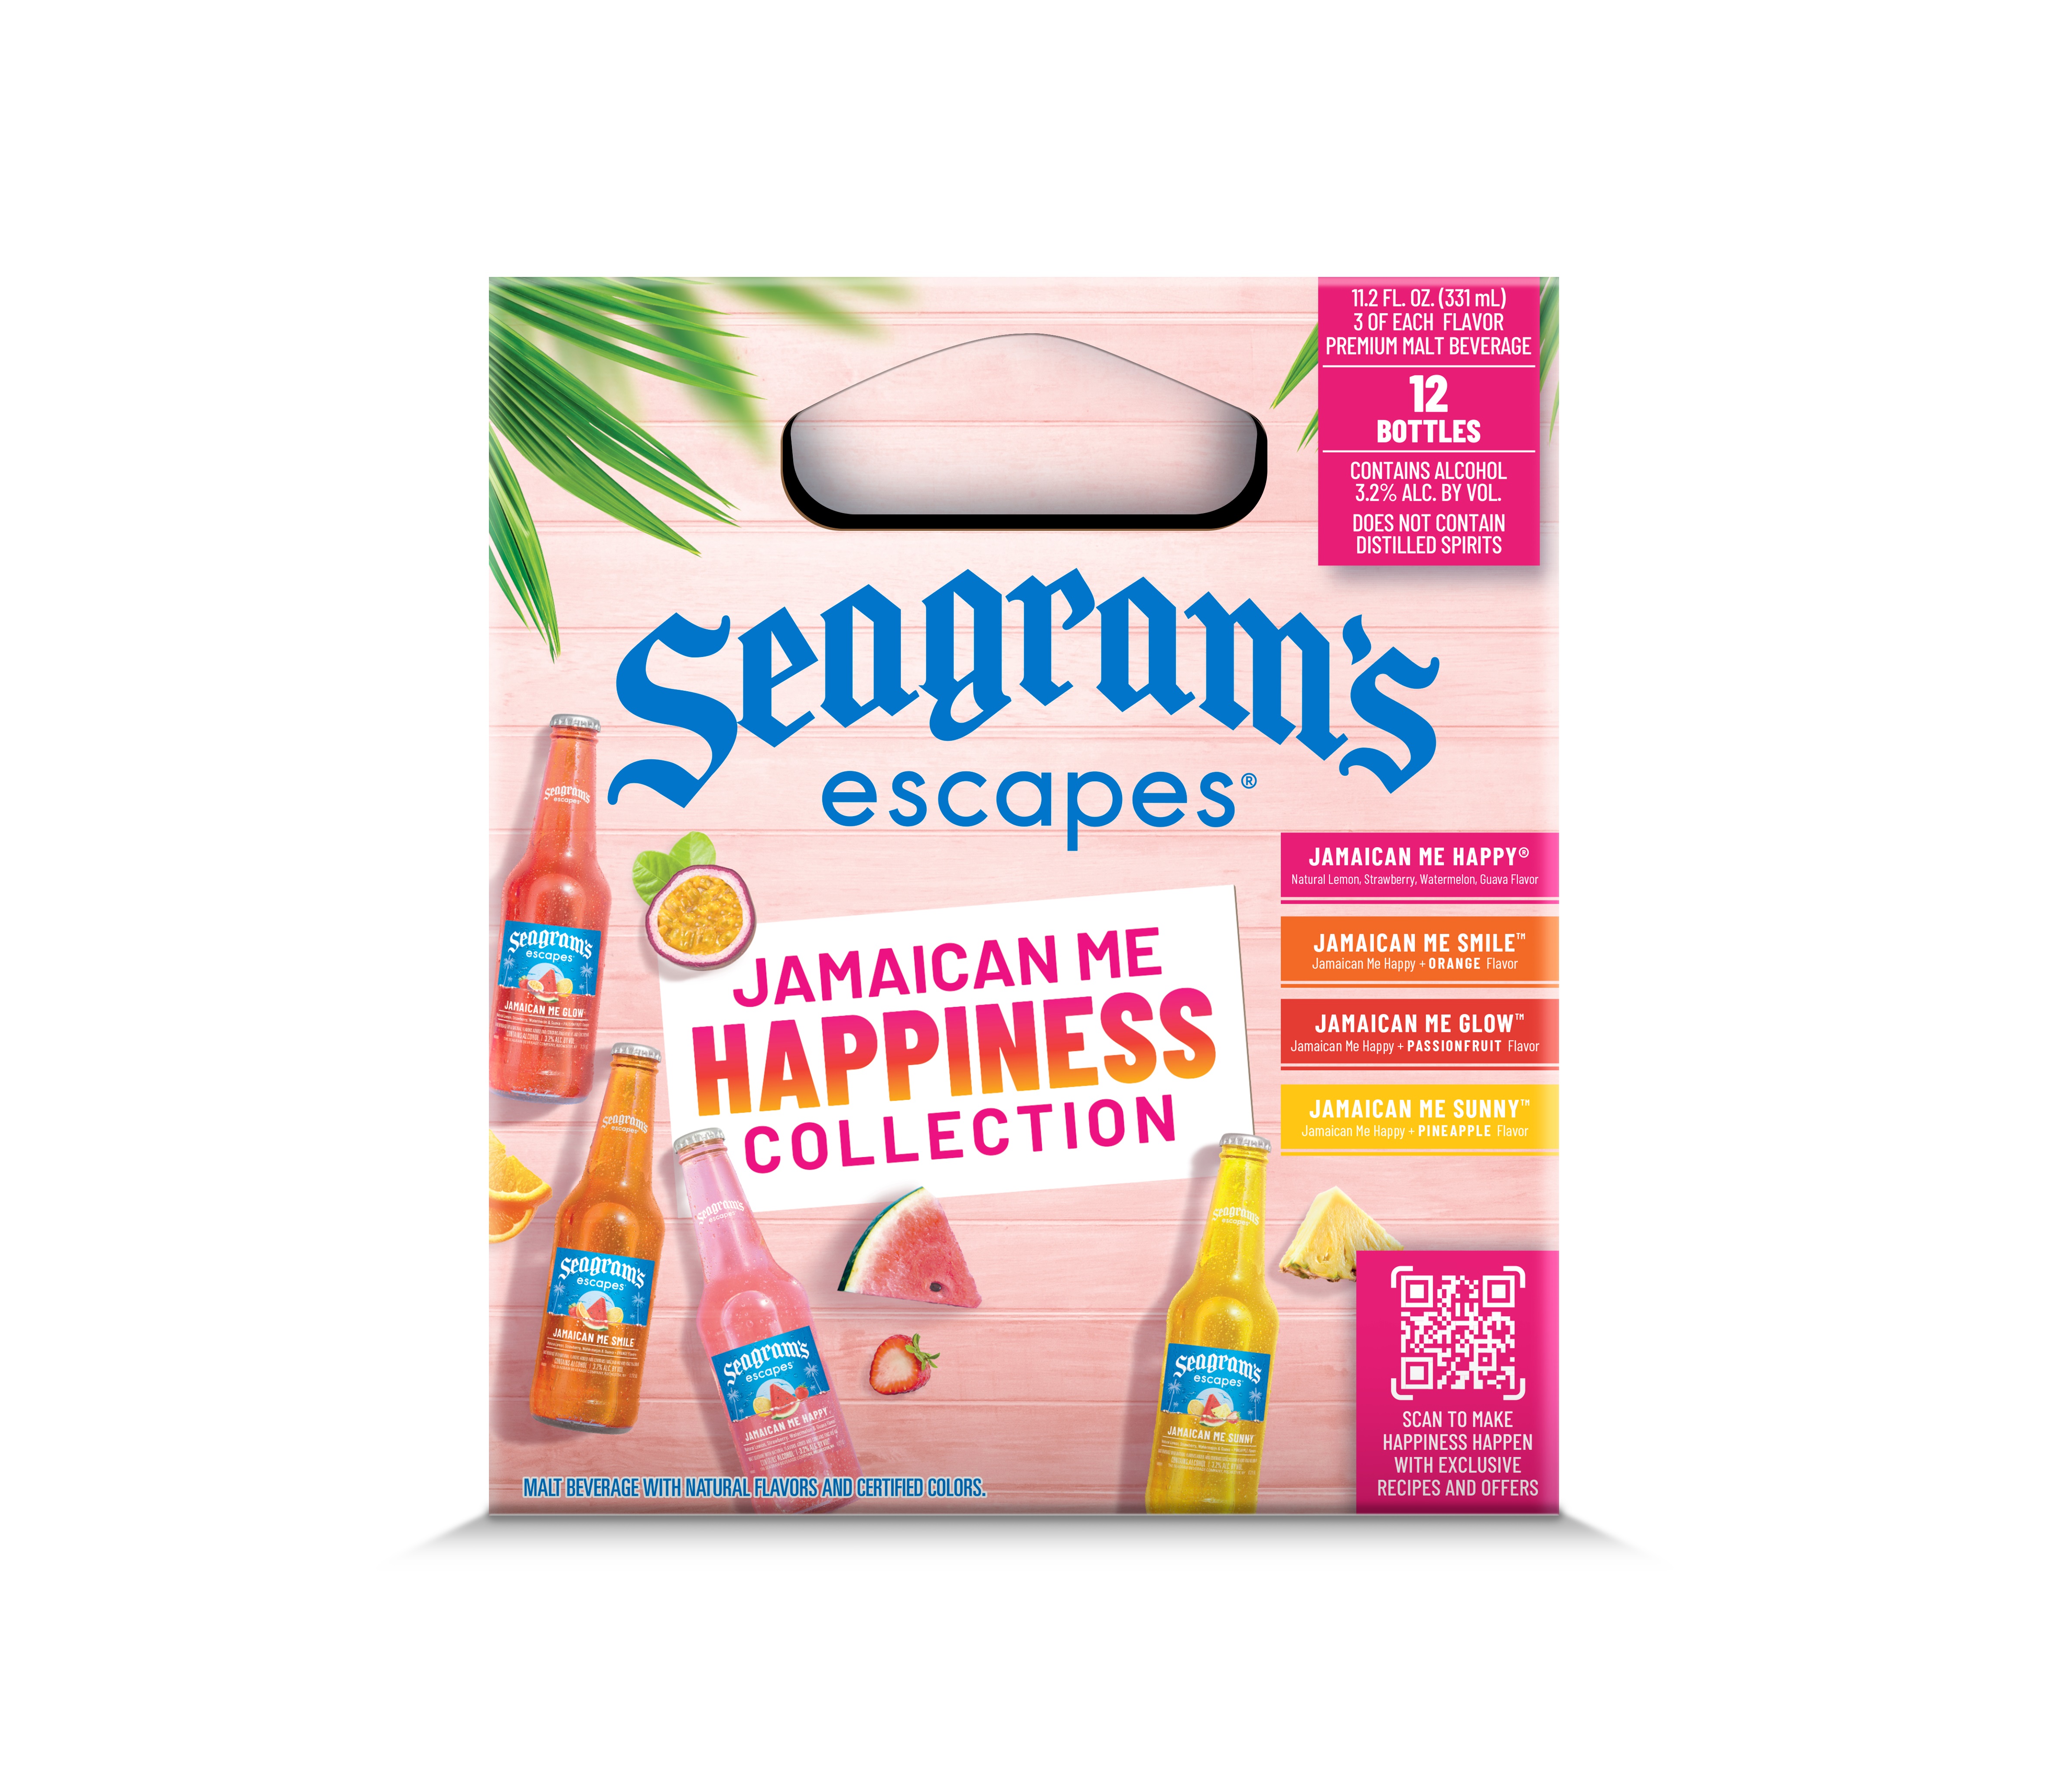 Seagram's Escapes Jamaican Me Happiness Collection, Flavored Malt Beverage, 12 pack, 11.2 fl oz Glass Bottles, 3.2% ABV - image 3 of 4